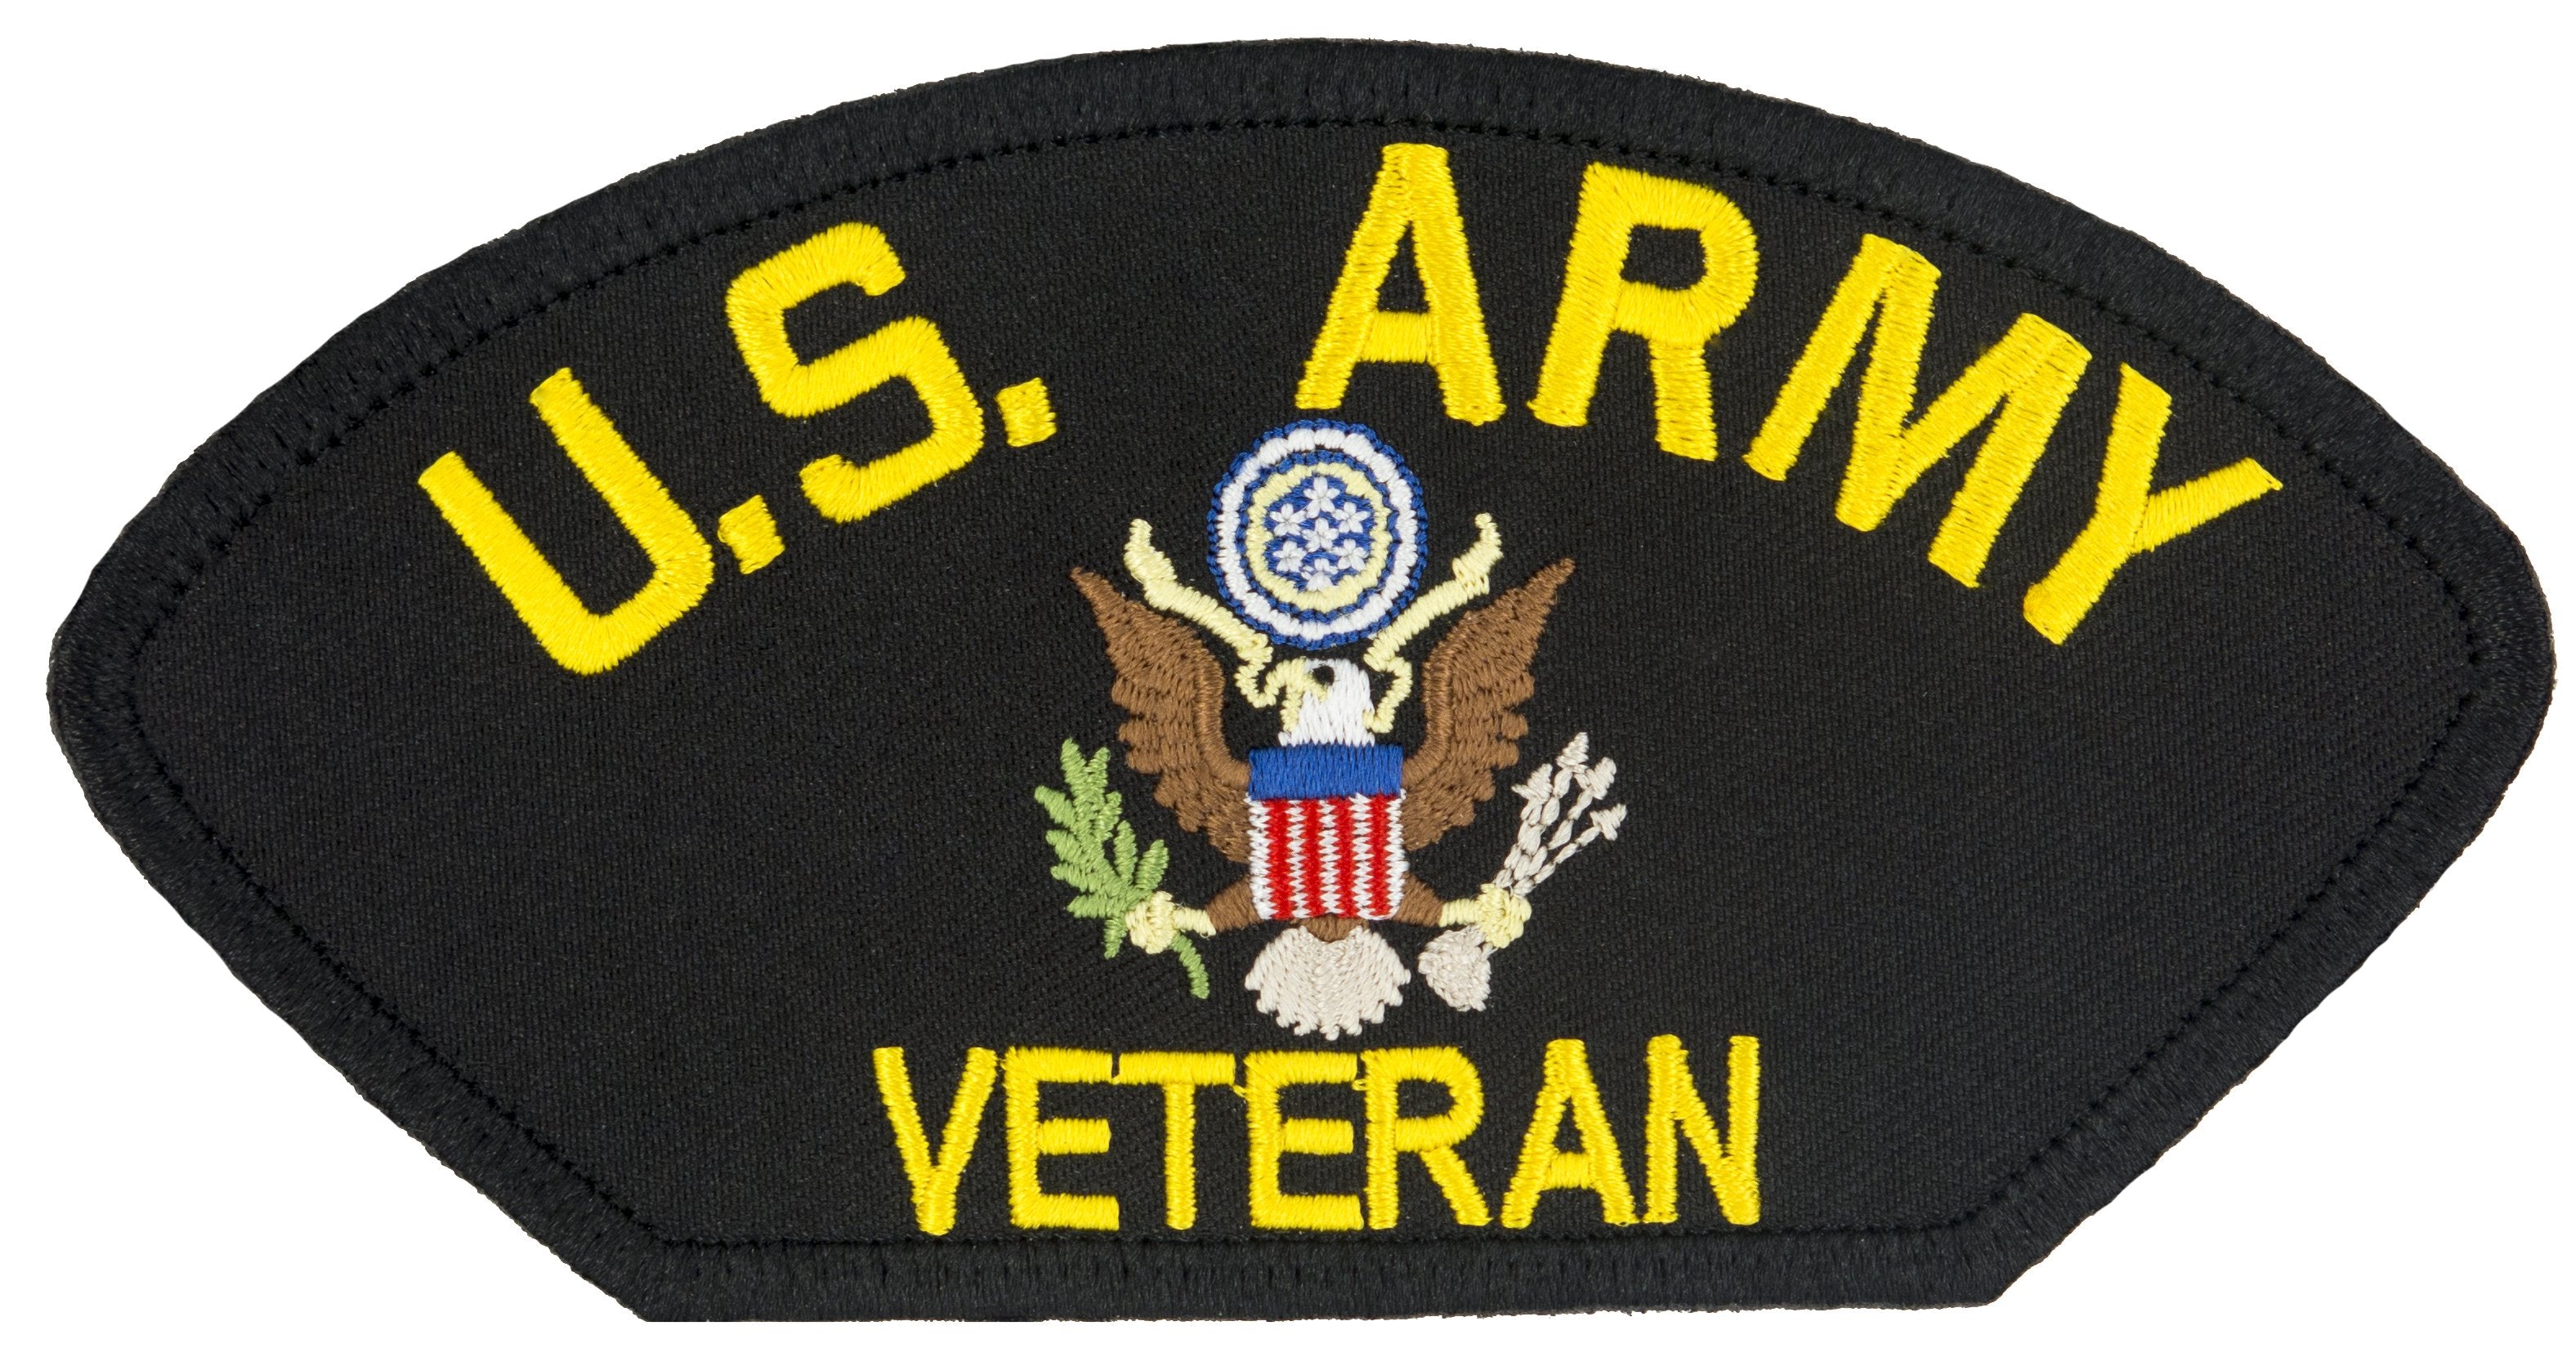 US Army Veteran Embroidered Patch 5 3/16" x 2 5/8"